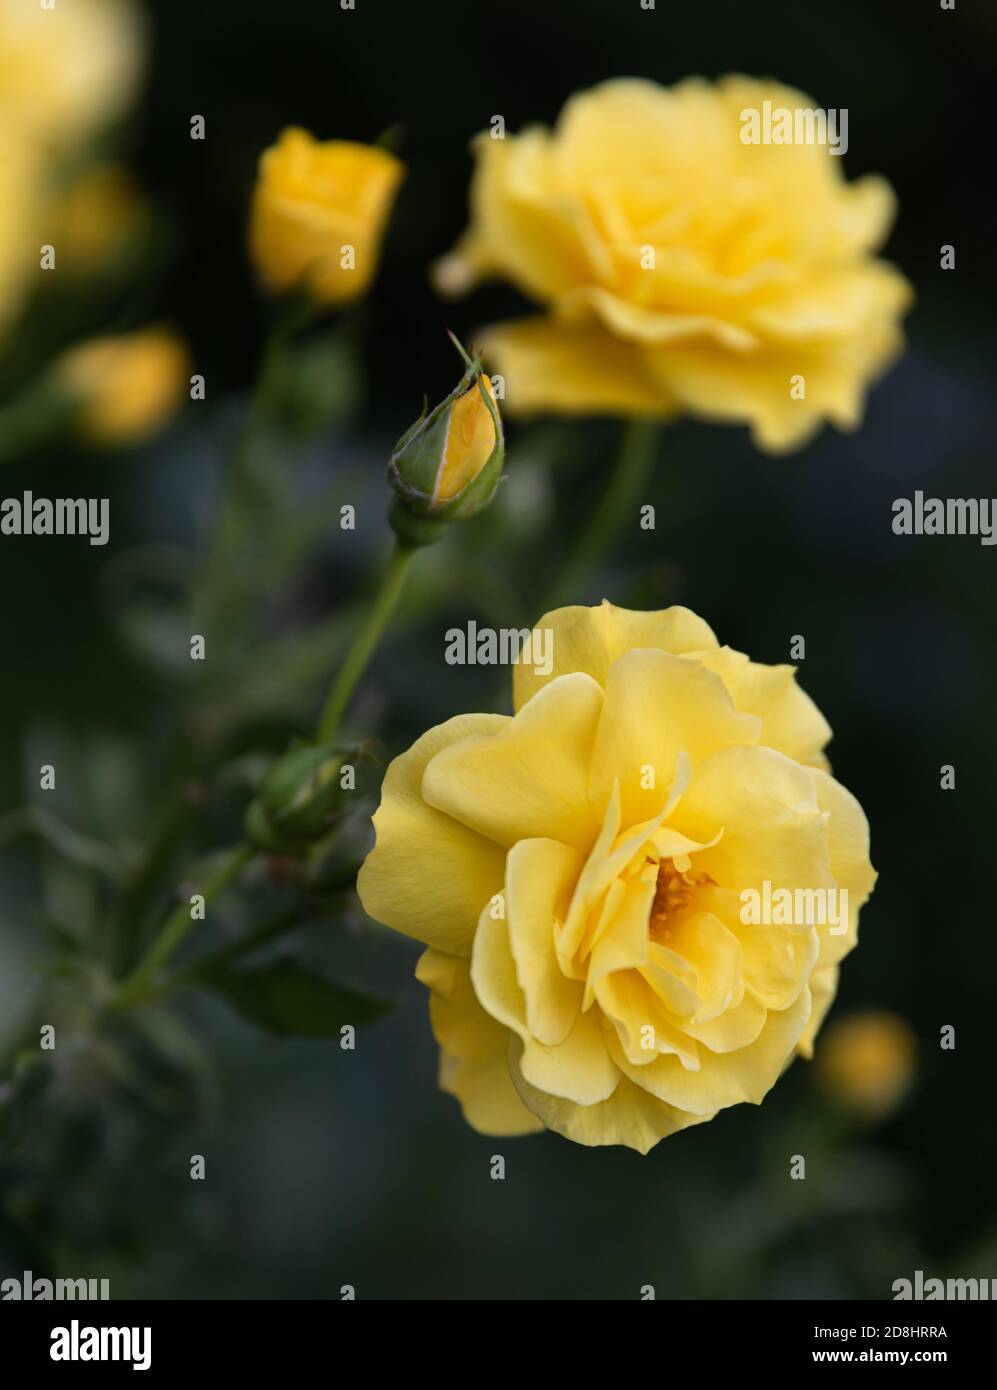 Gentle nature background with blooming roses. Beautiful rose flowers in  garden. Floral romantic image Stock Photo - Alamy